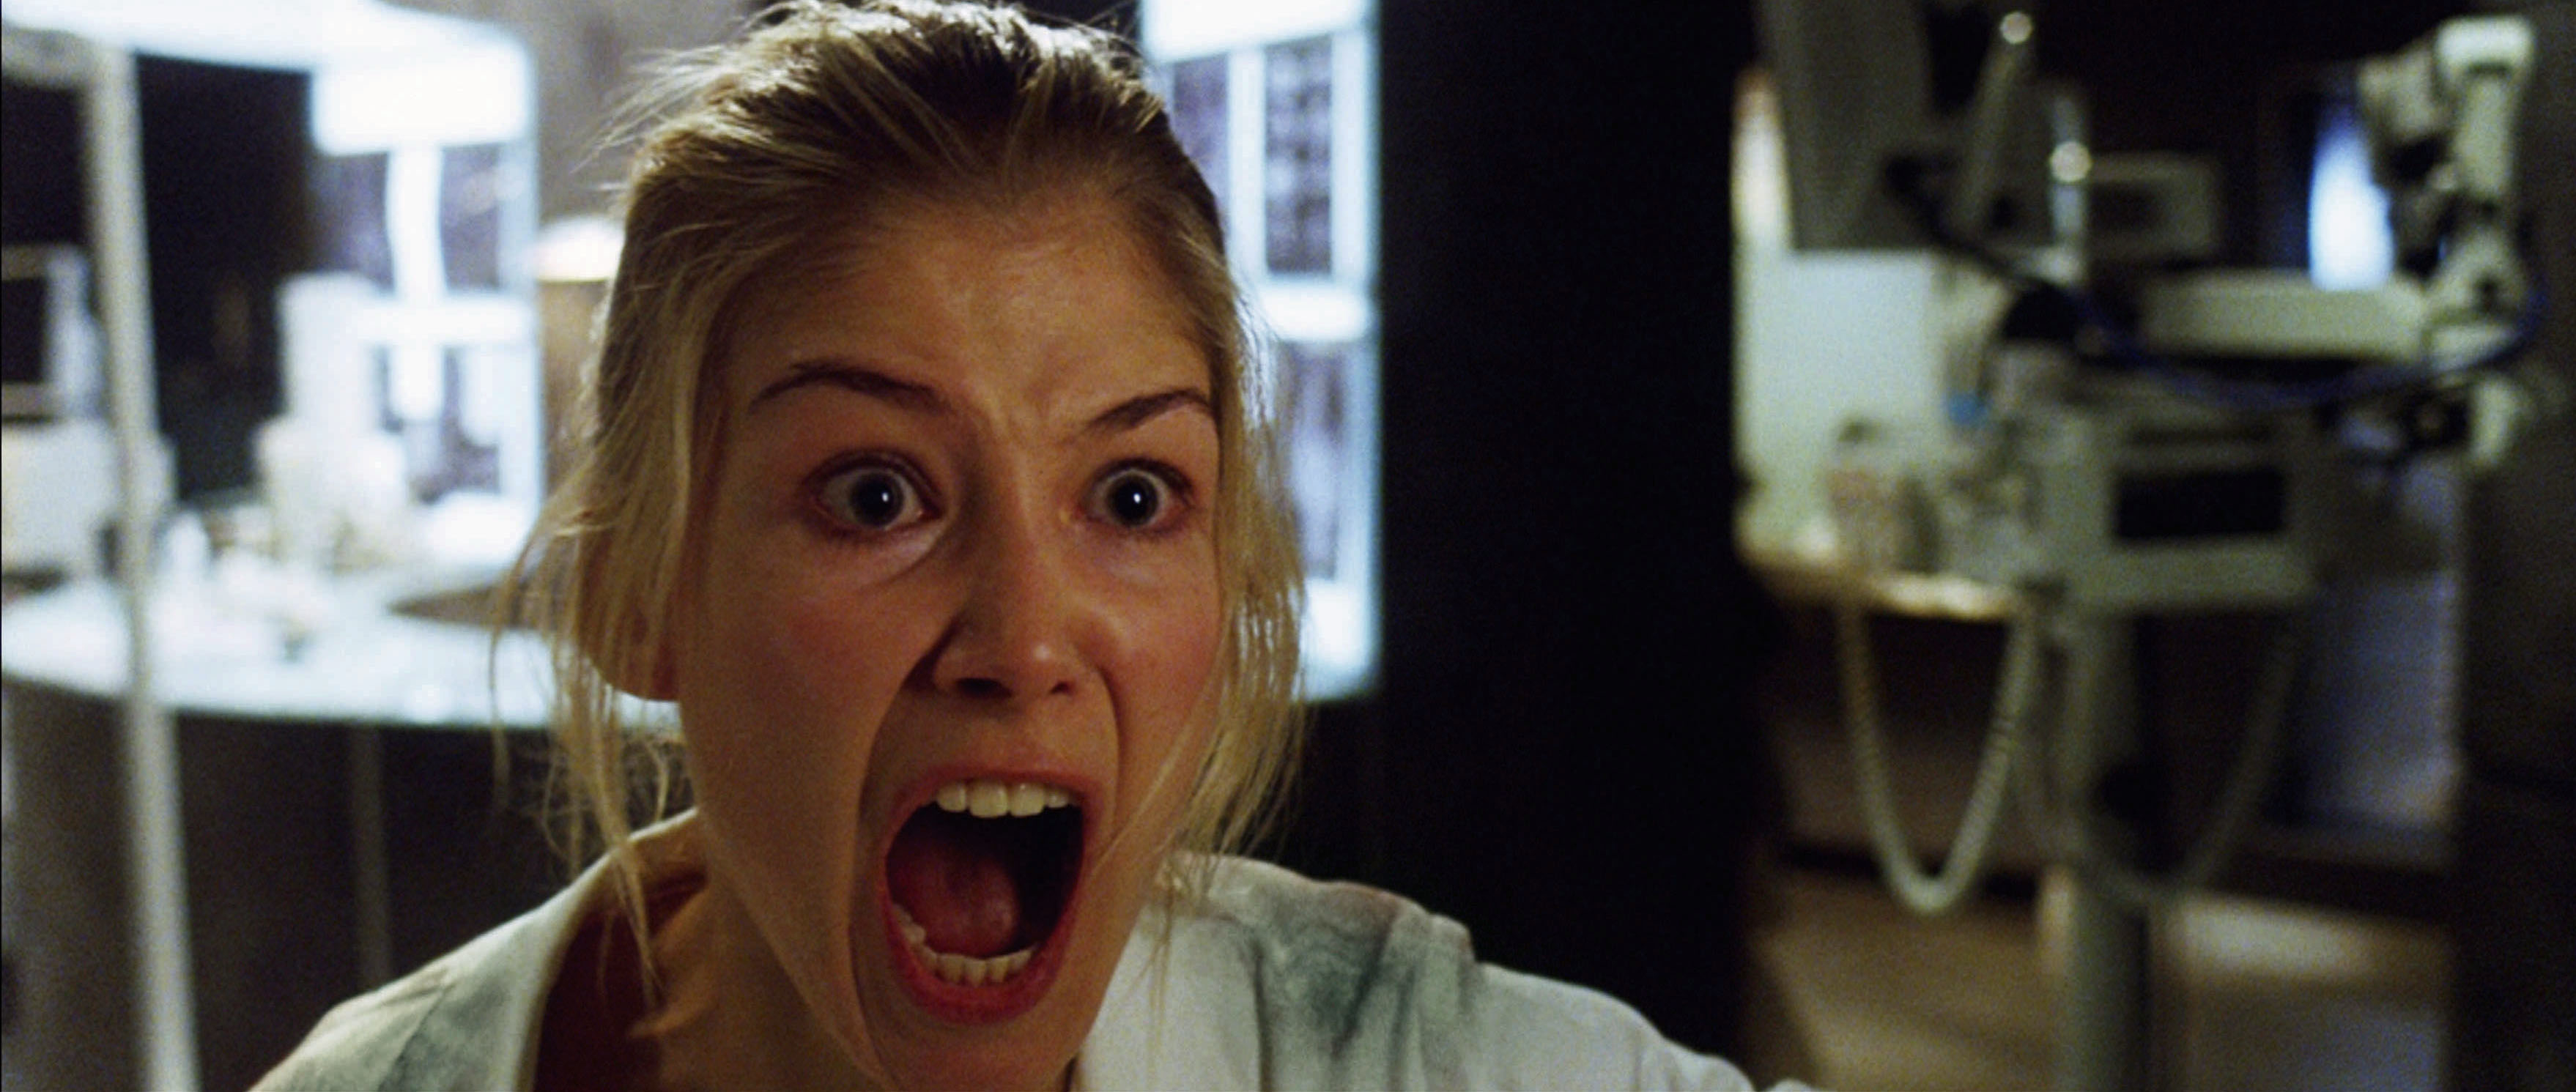 in a scene, Rosamund with a terrified expression, screaming, in a clinical setting